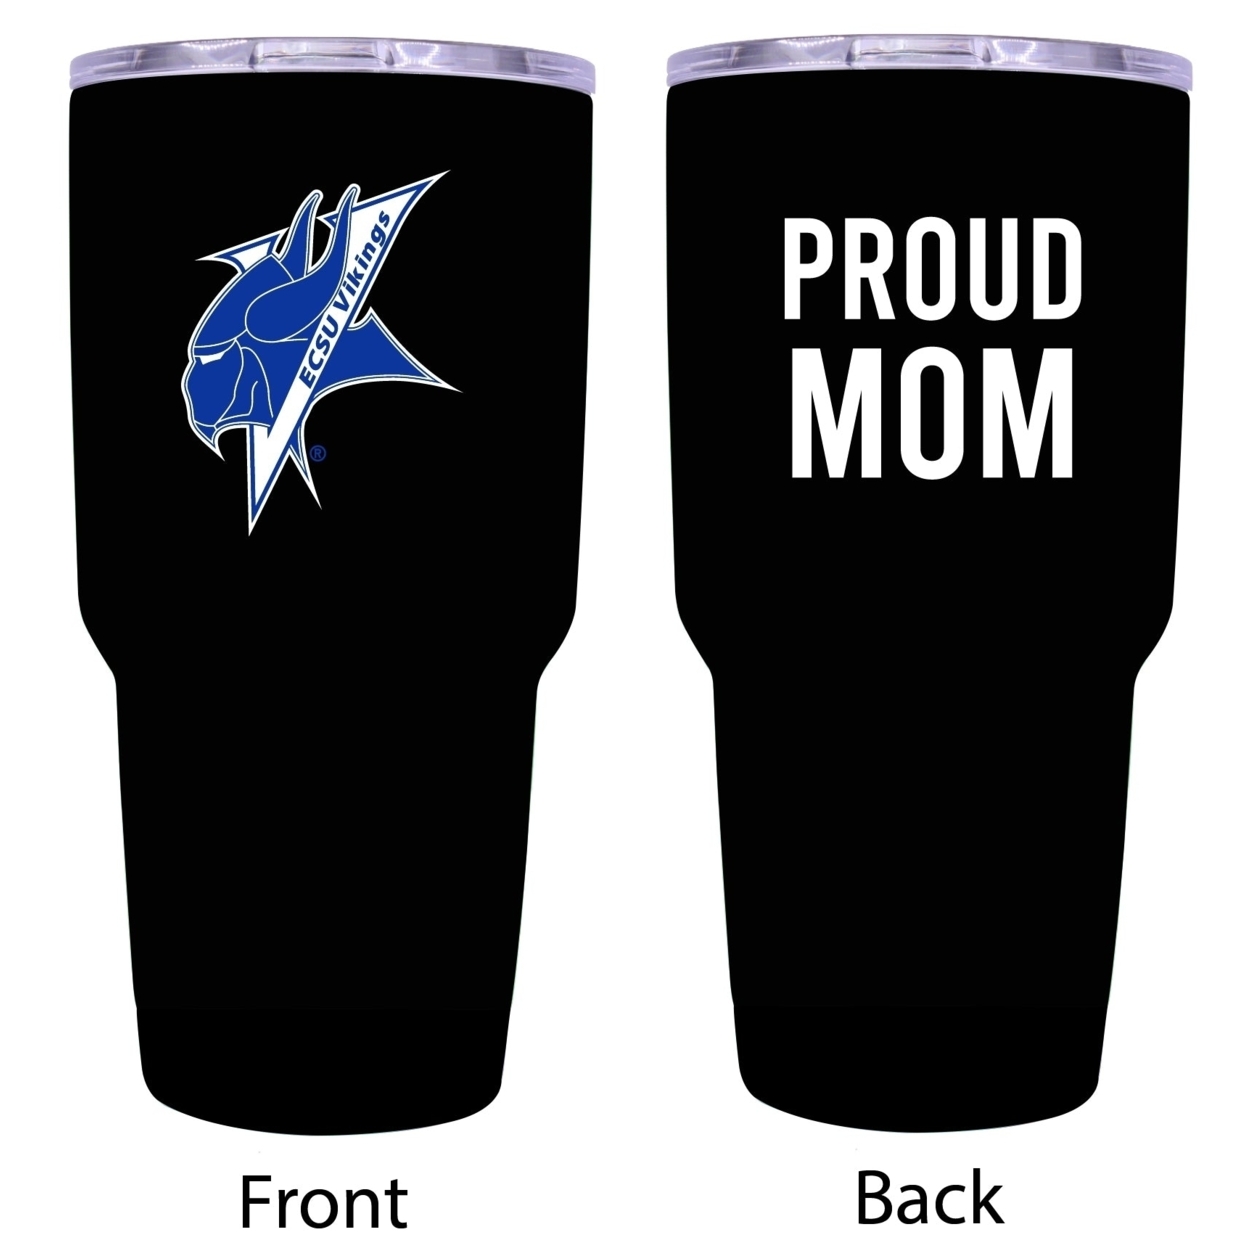 Elizabeth City State University Proud Mom Insulated Stainless Steel Tumbler